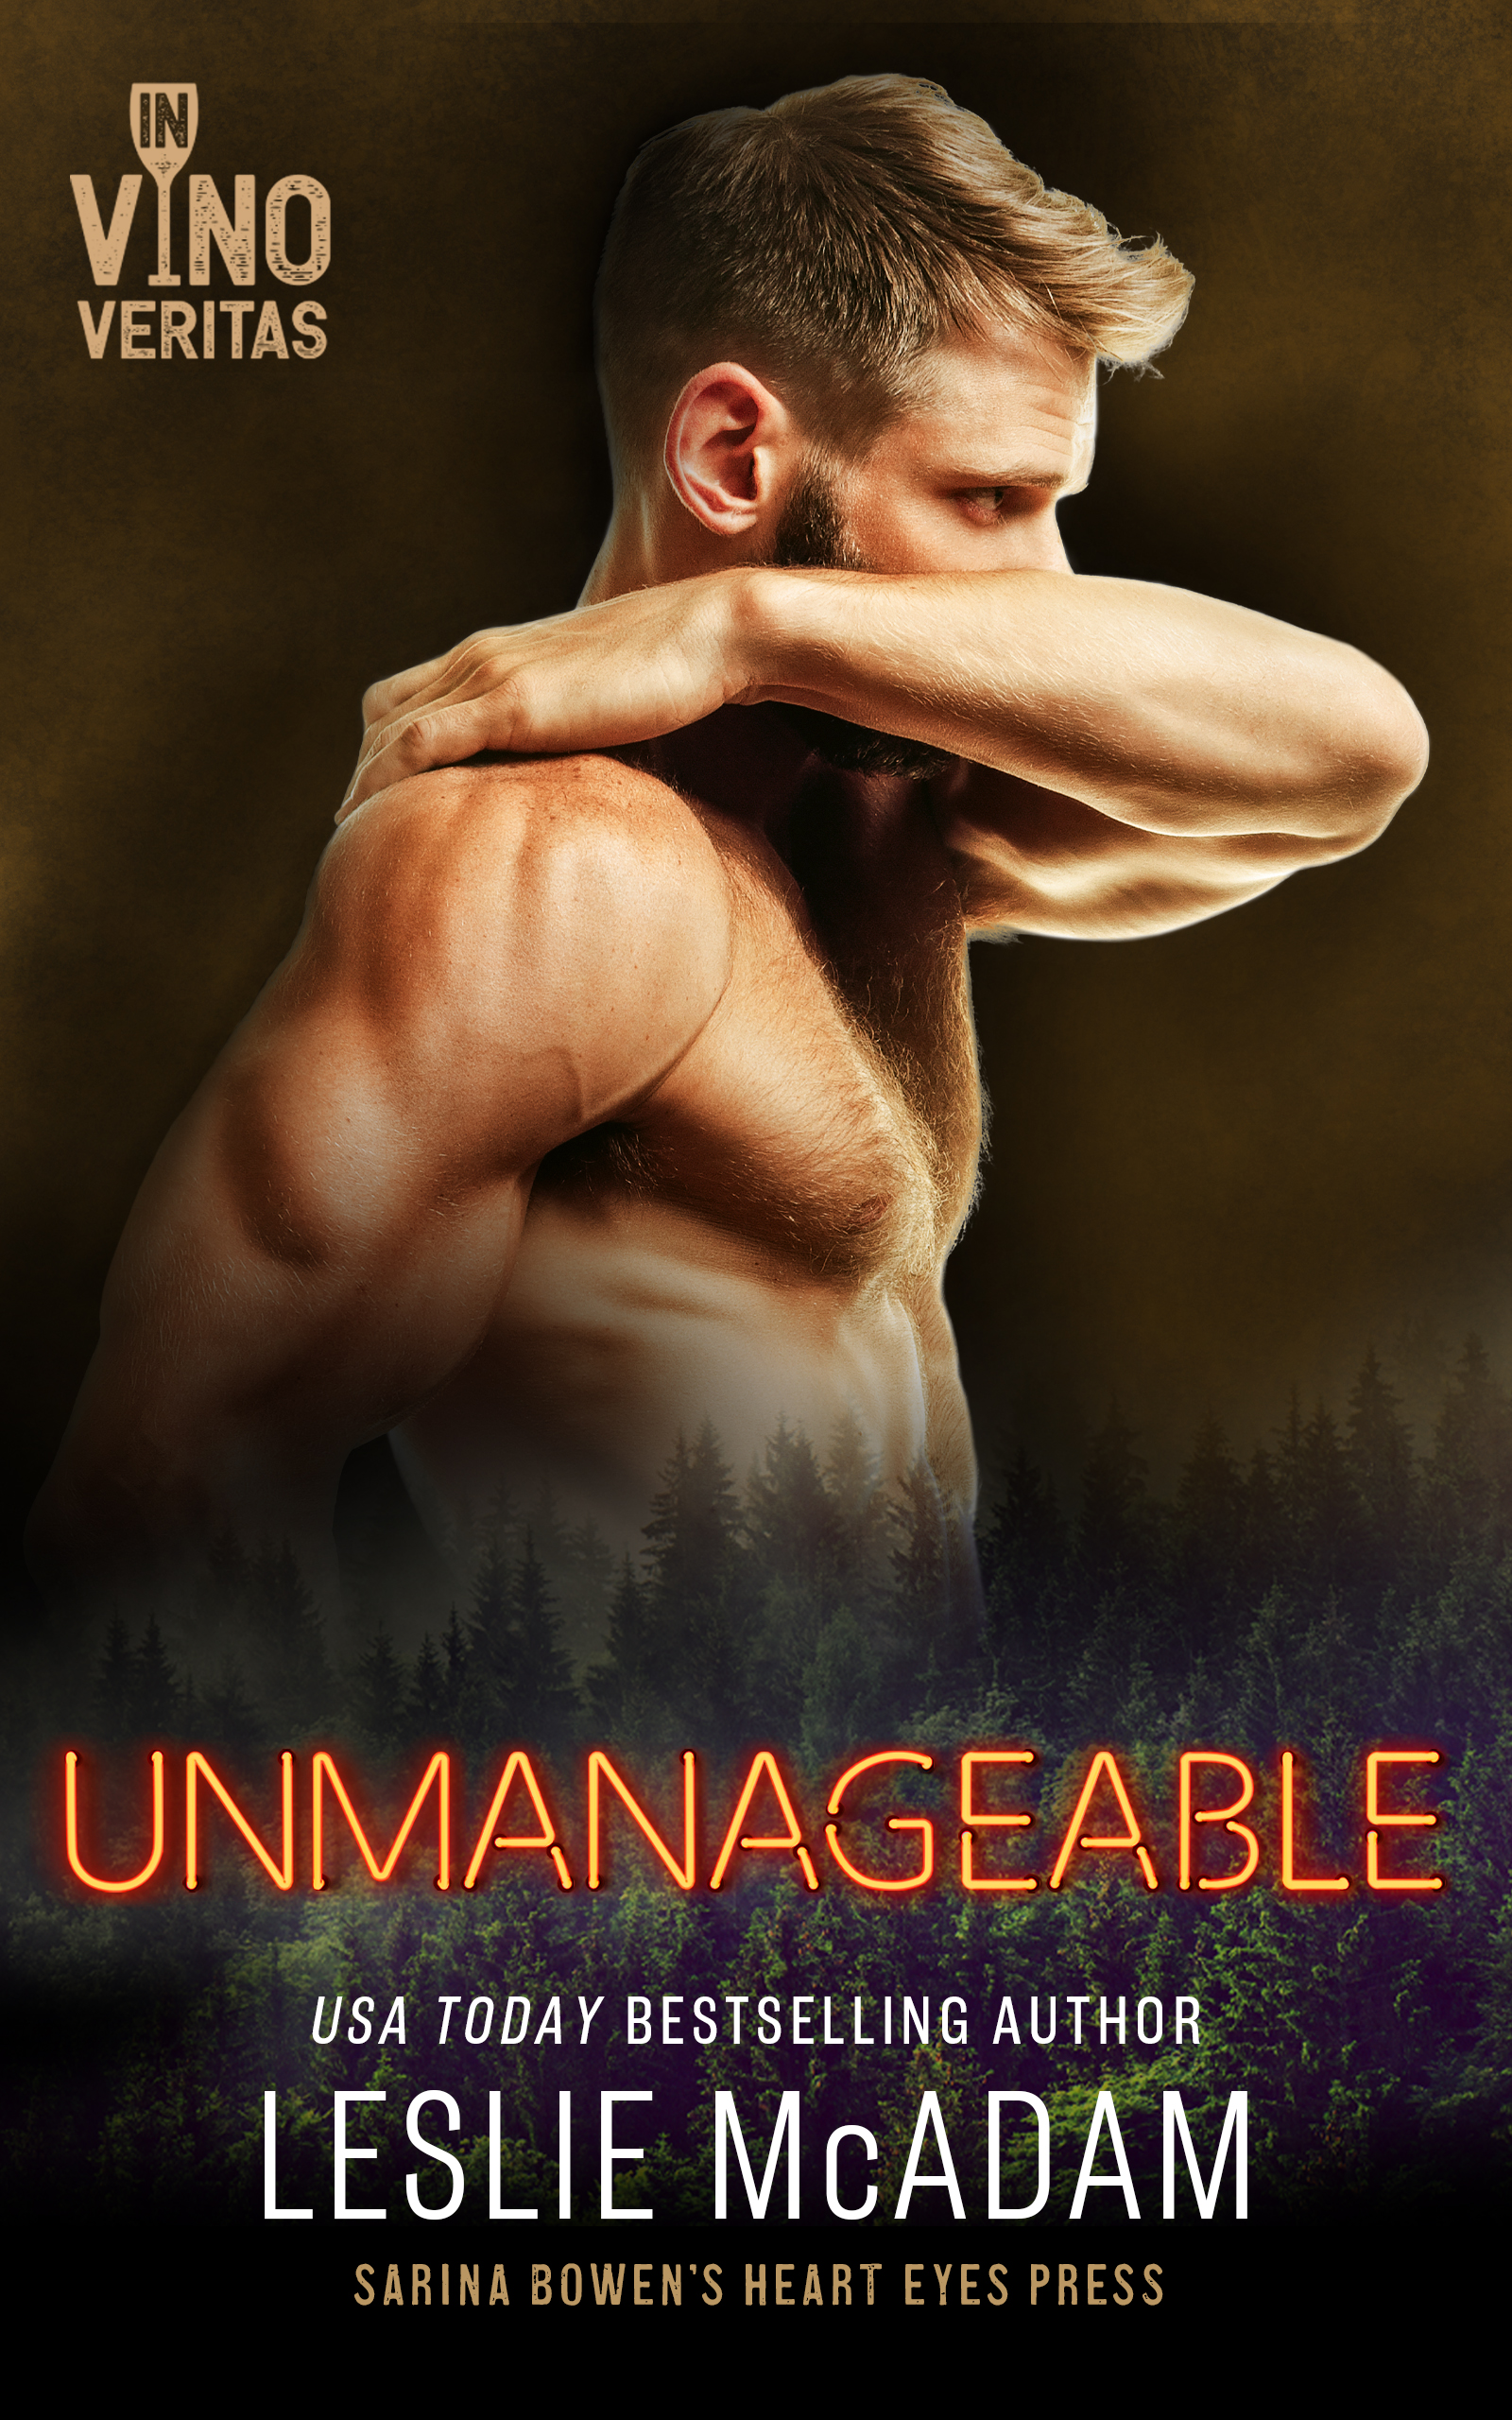 Unmanageable by Leslie McAdam PDF Download